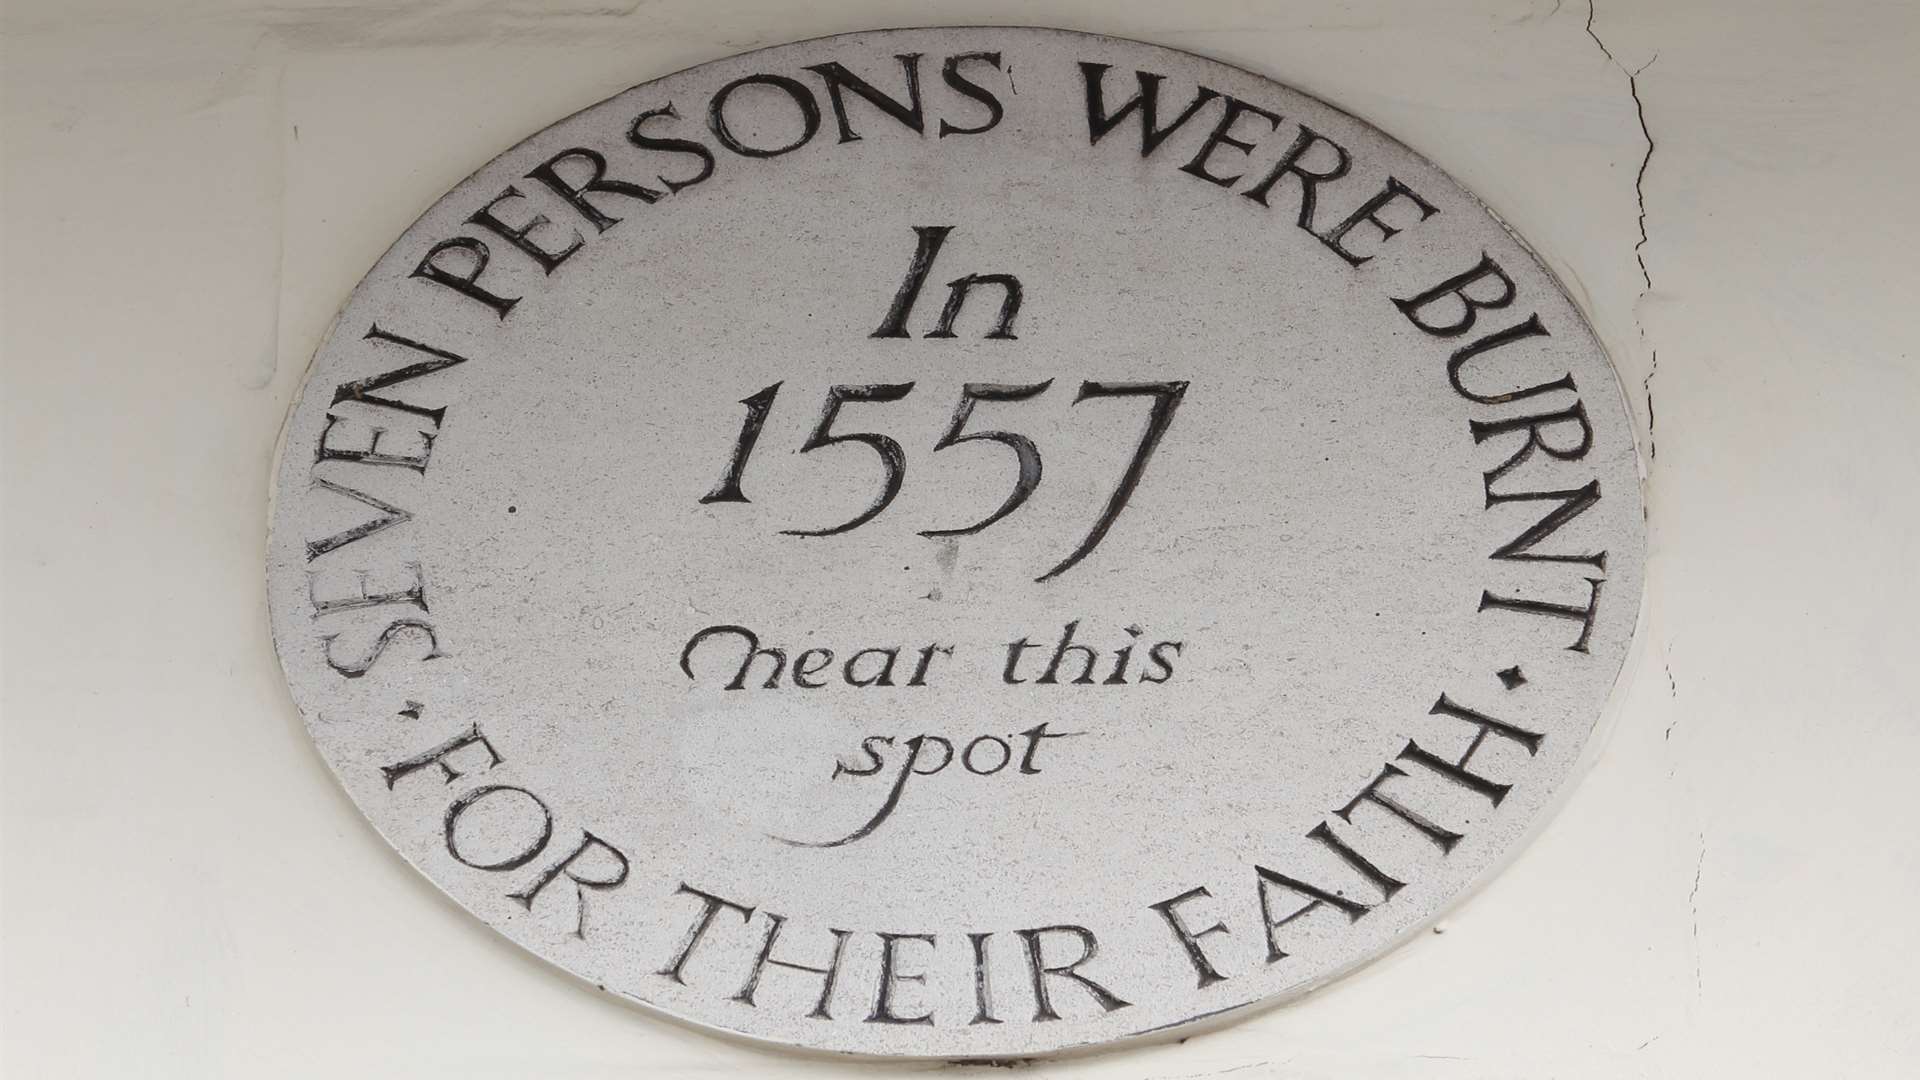 A plaque outside Drakes in Maidstone commemorates seven people burned for their beliefs